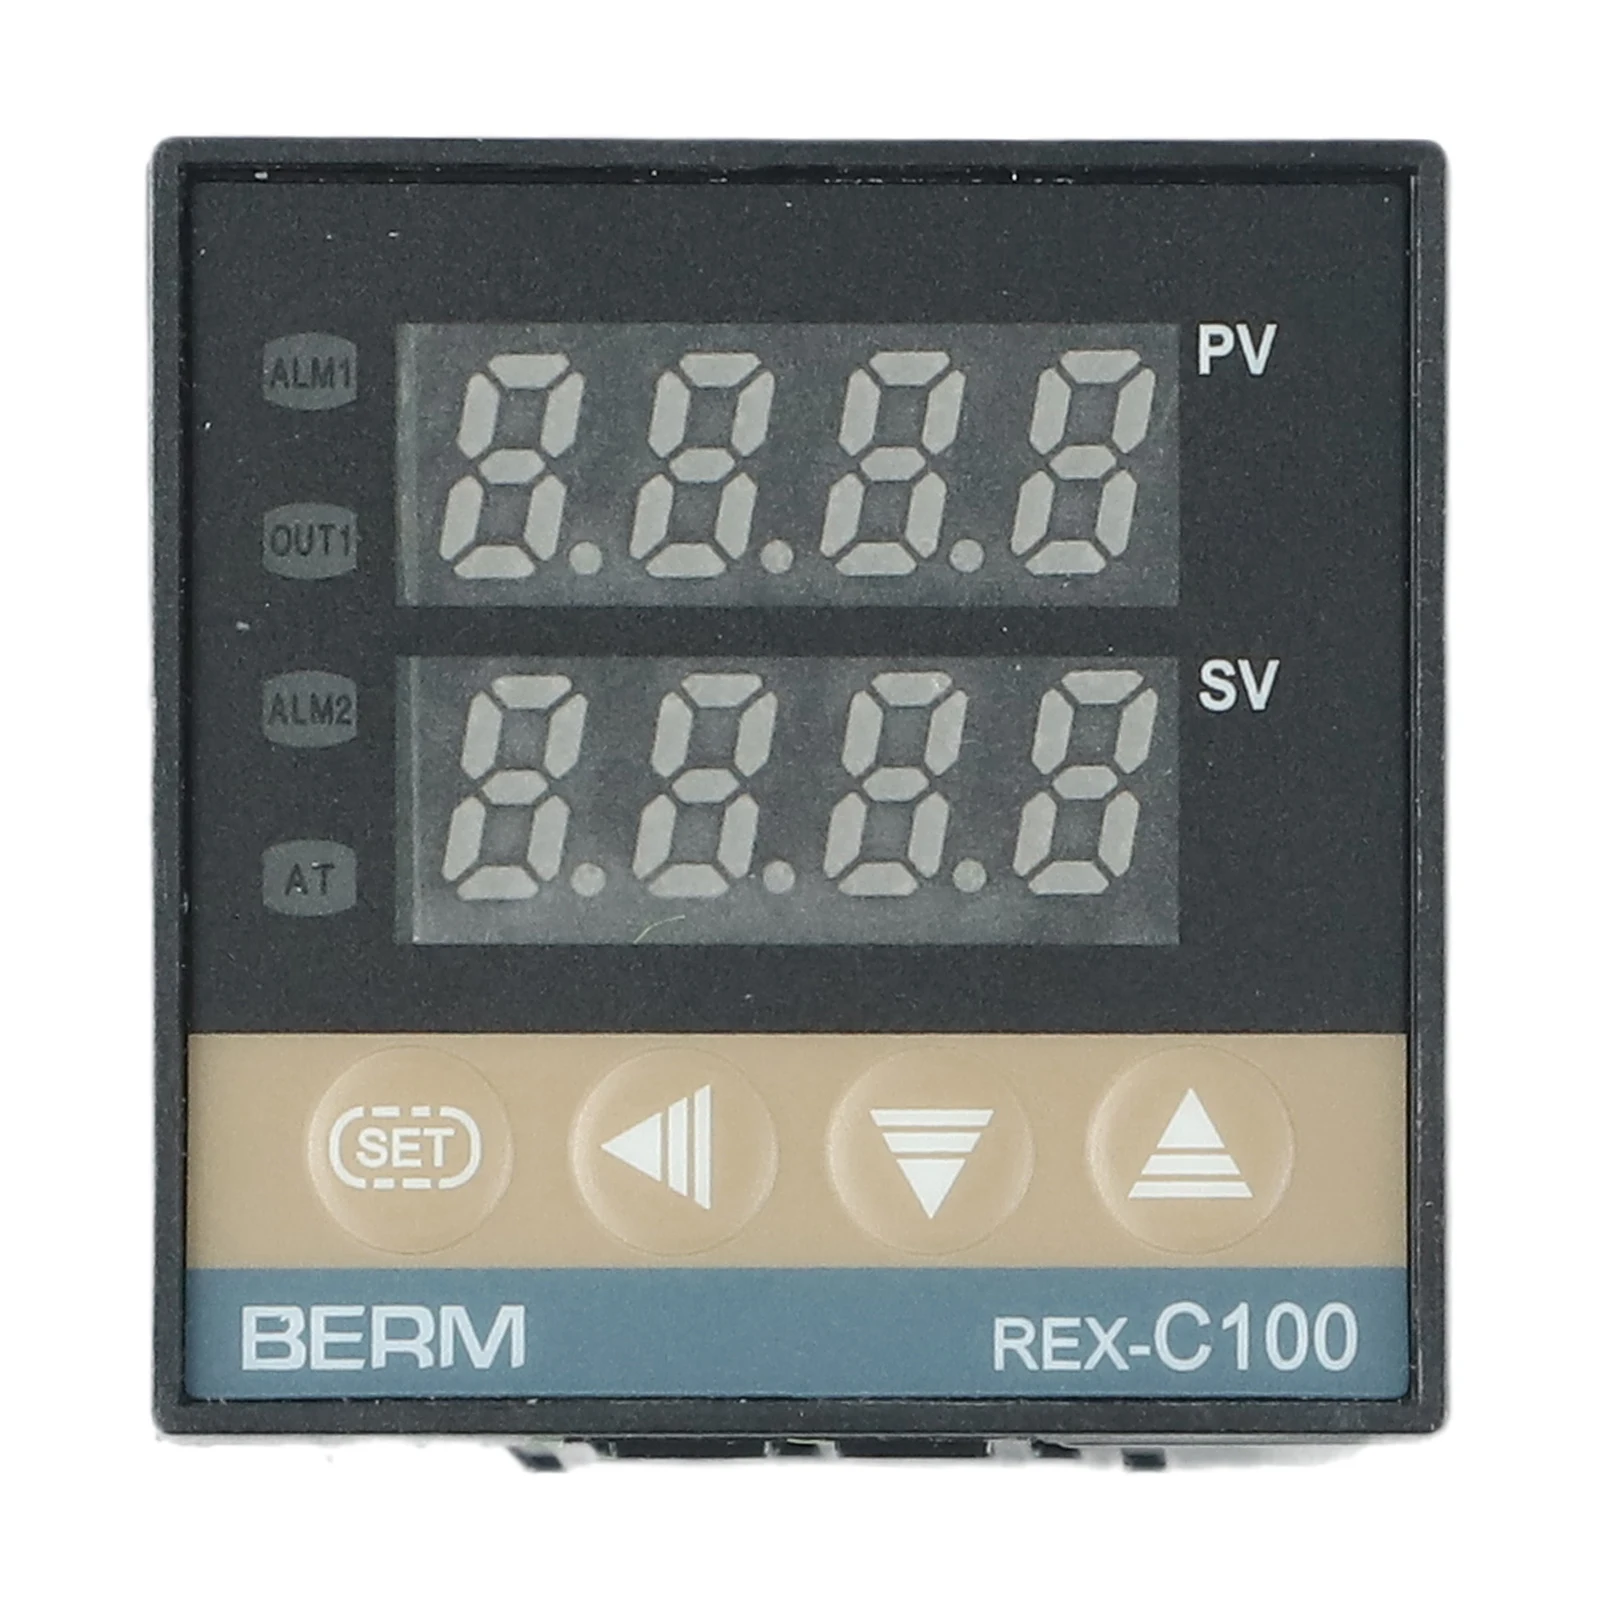 

Professional Grade REXC100 M*AN Intelligent Digital Display Temperature Controller for Industrial Applications